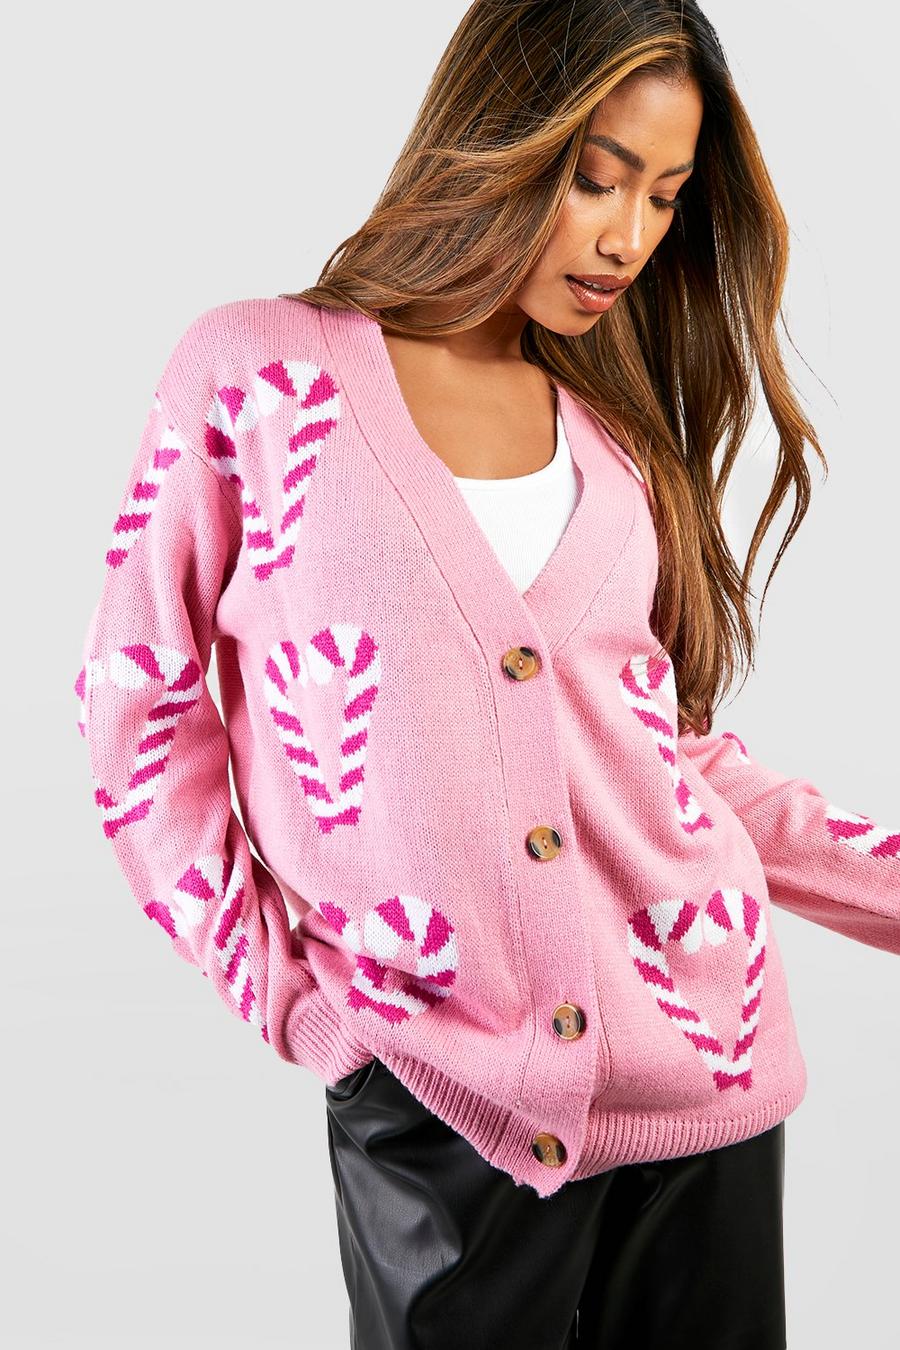 Baby pink Candy Cane Hearts Christmas Cardigan